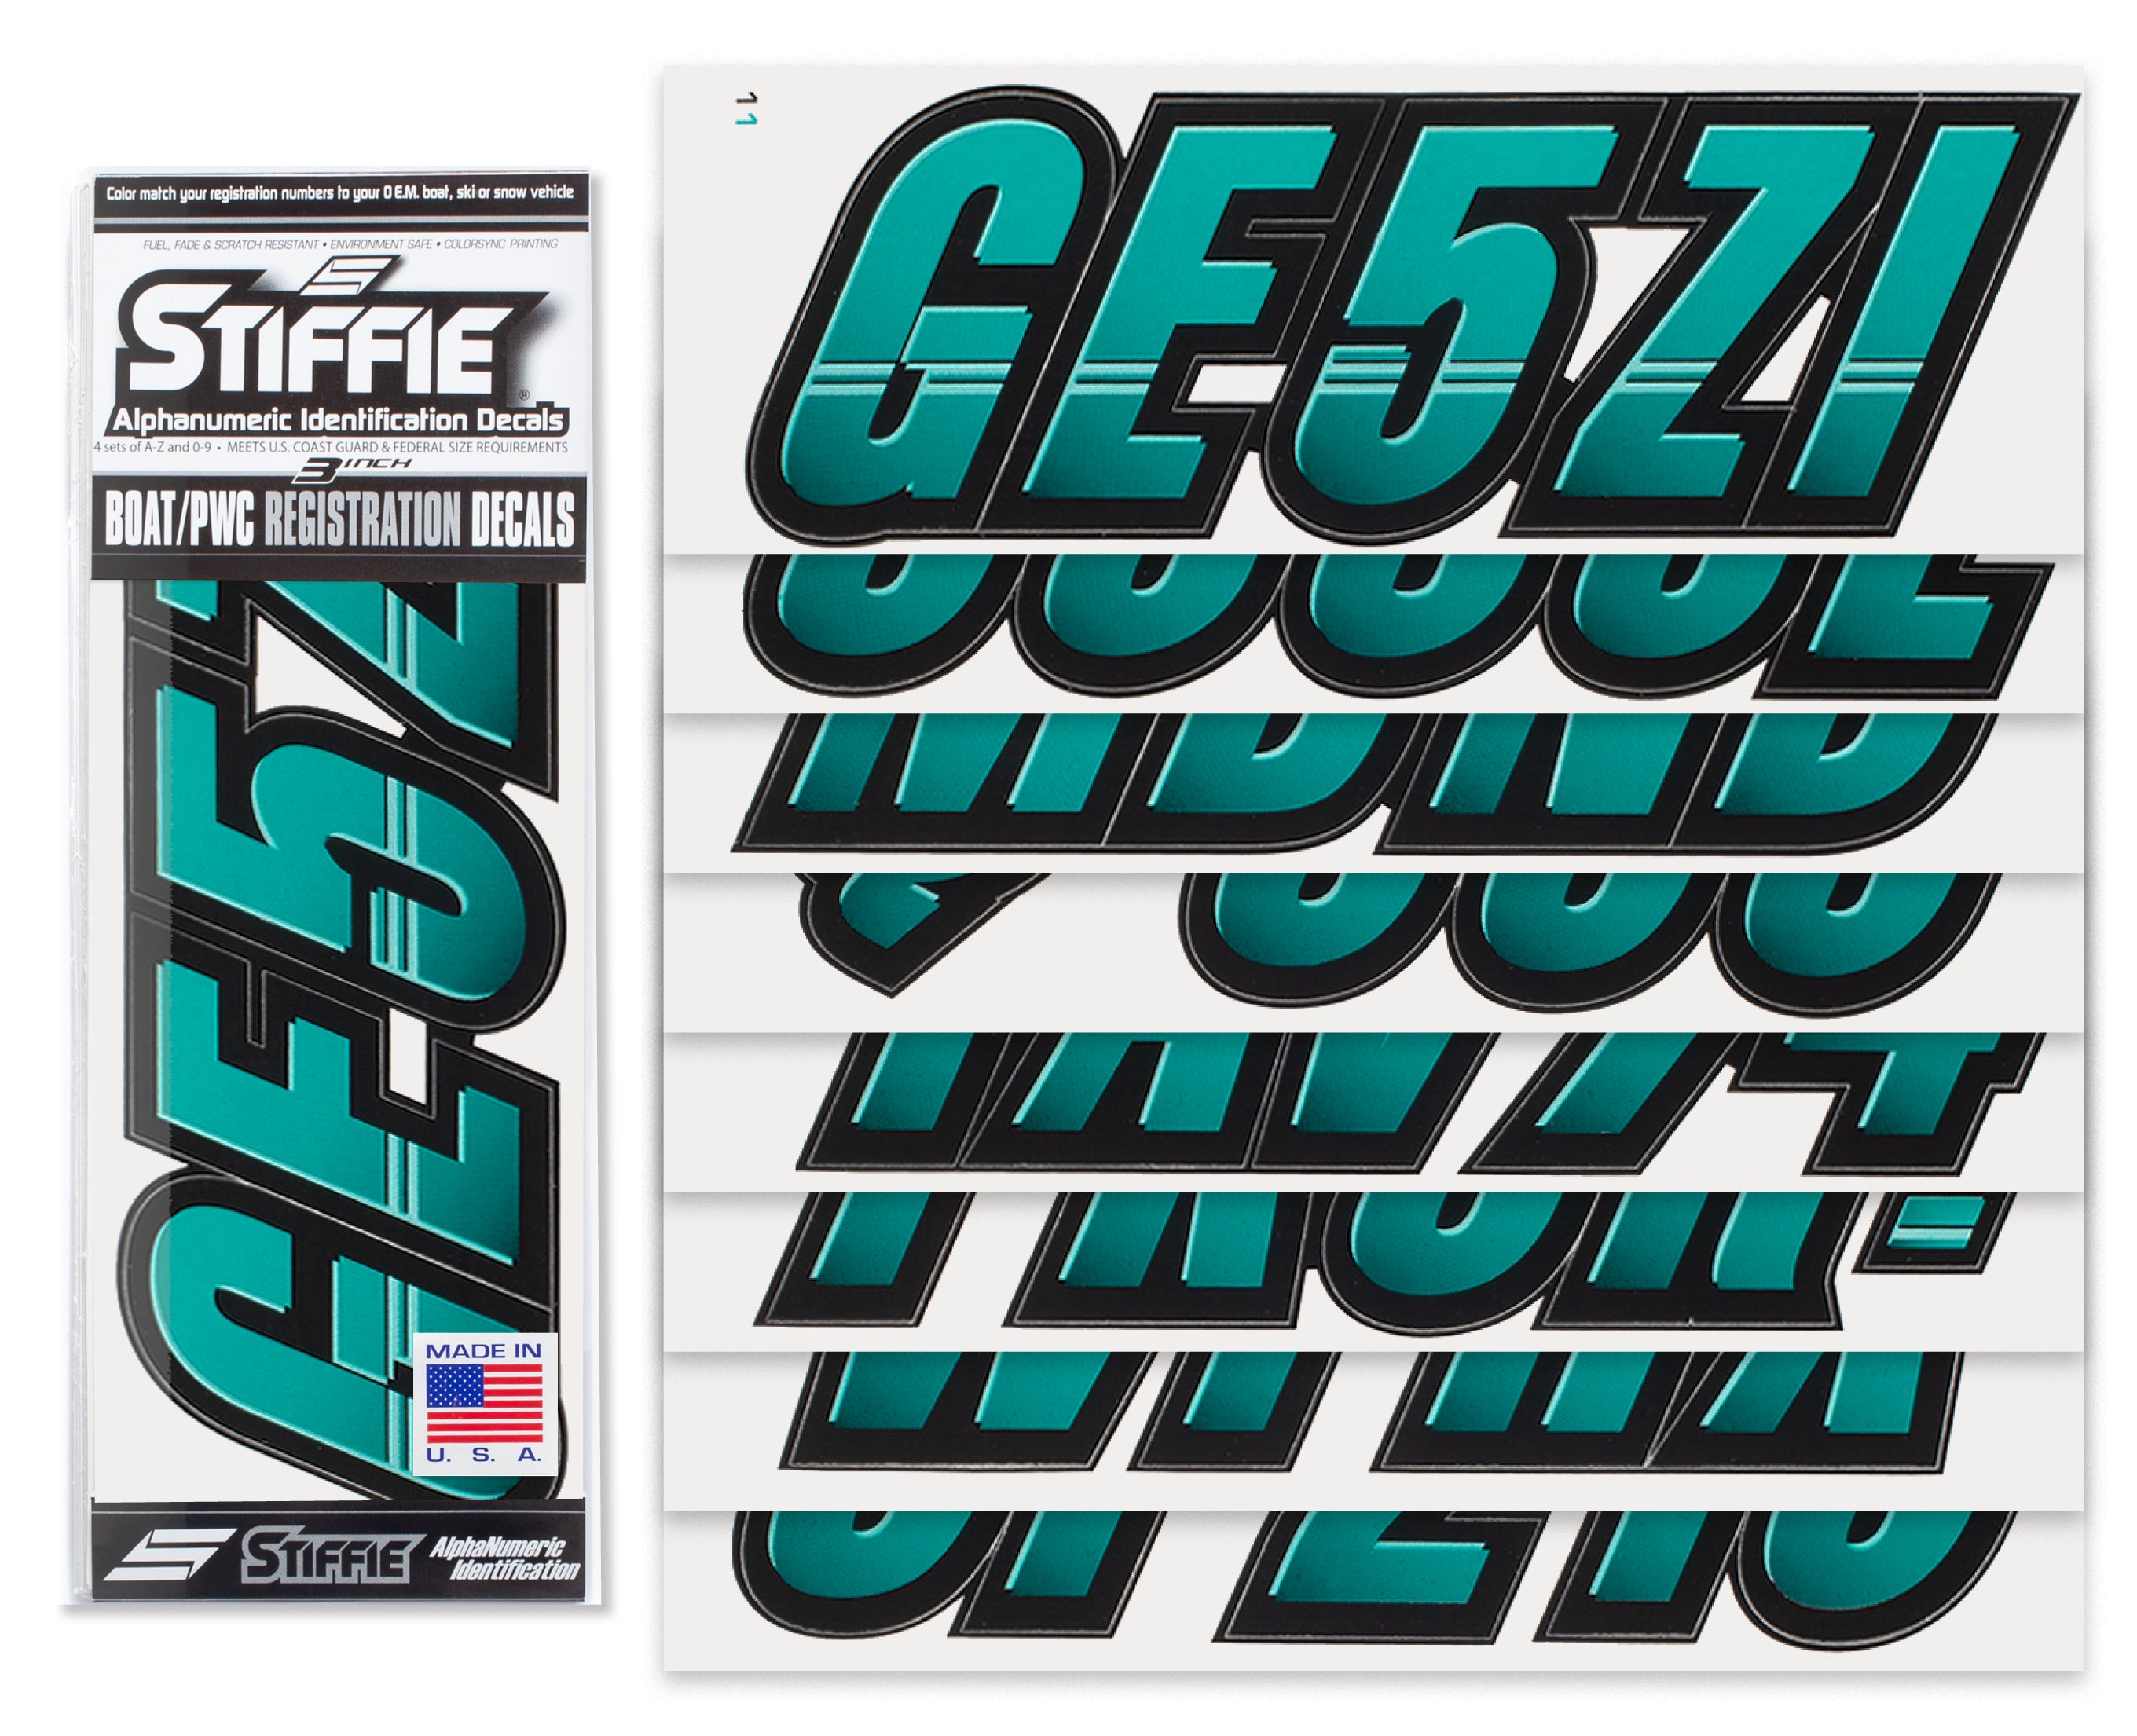 Stiffie TECHTRON Sea Teal / Black 3" Alpha-Numeric Registration Identification Numbers Stickers Decals for Boats & Personal Watercraft